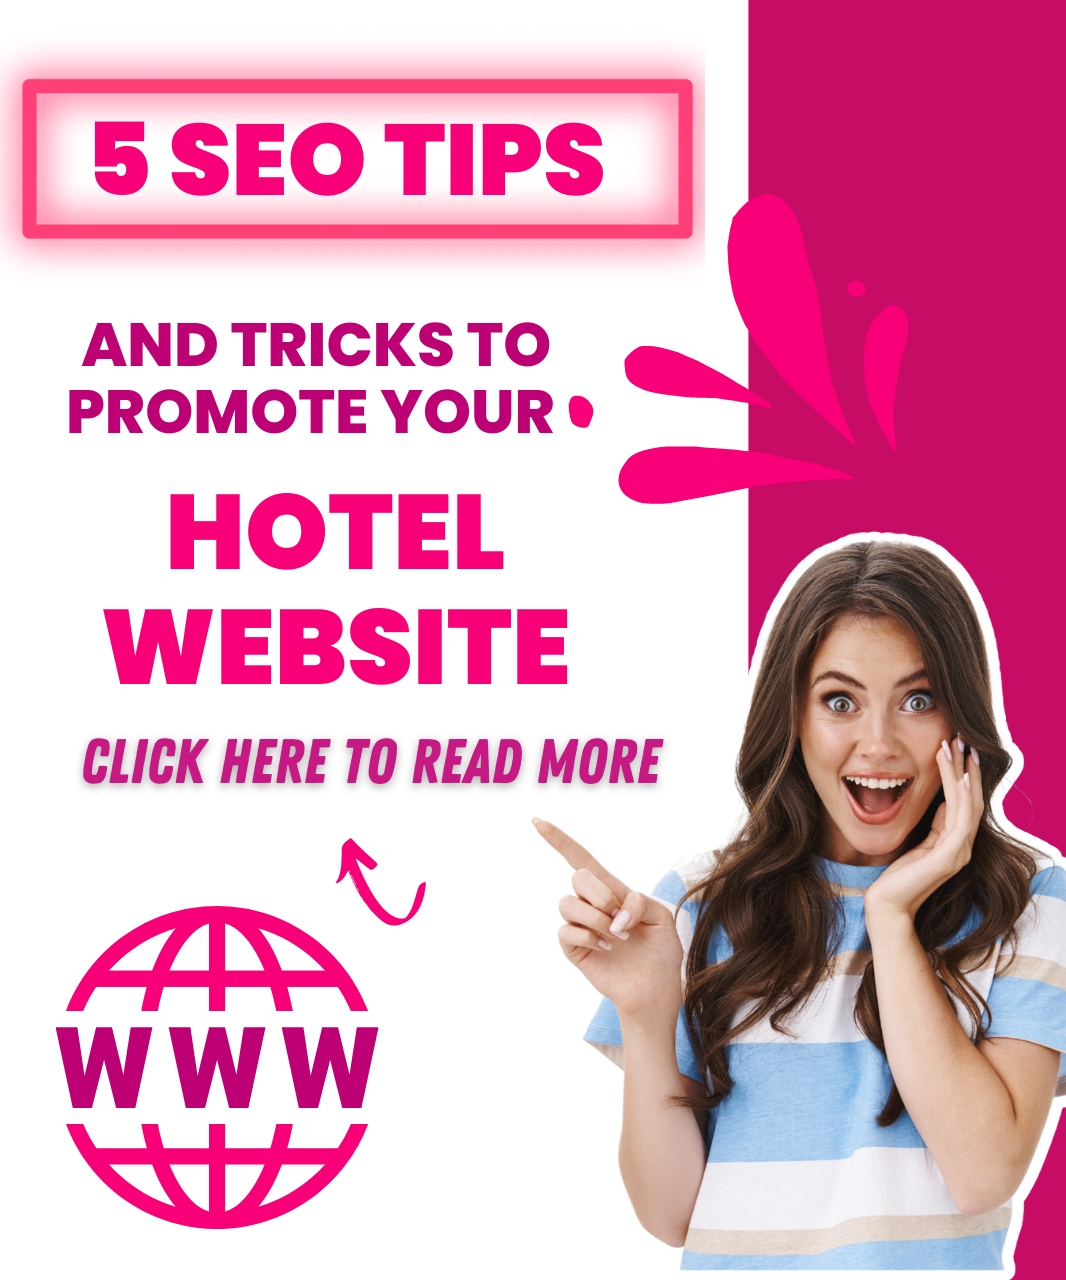 5 SEO Tips and Tricks to Promote Your Hotel Website